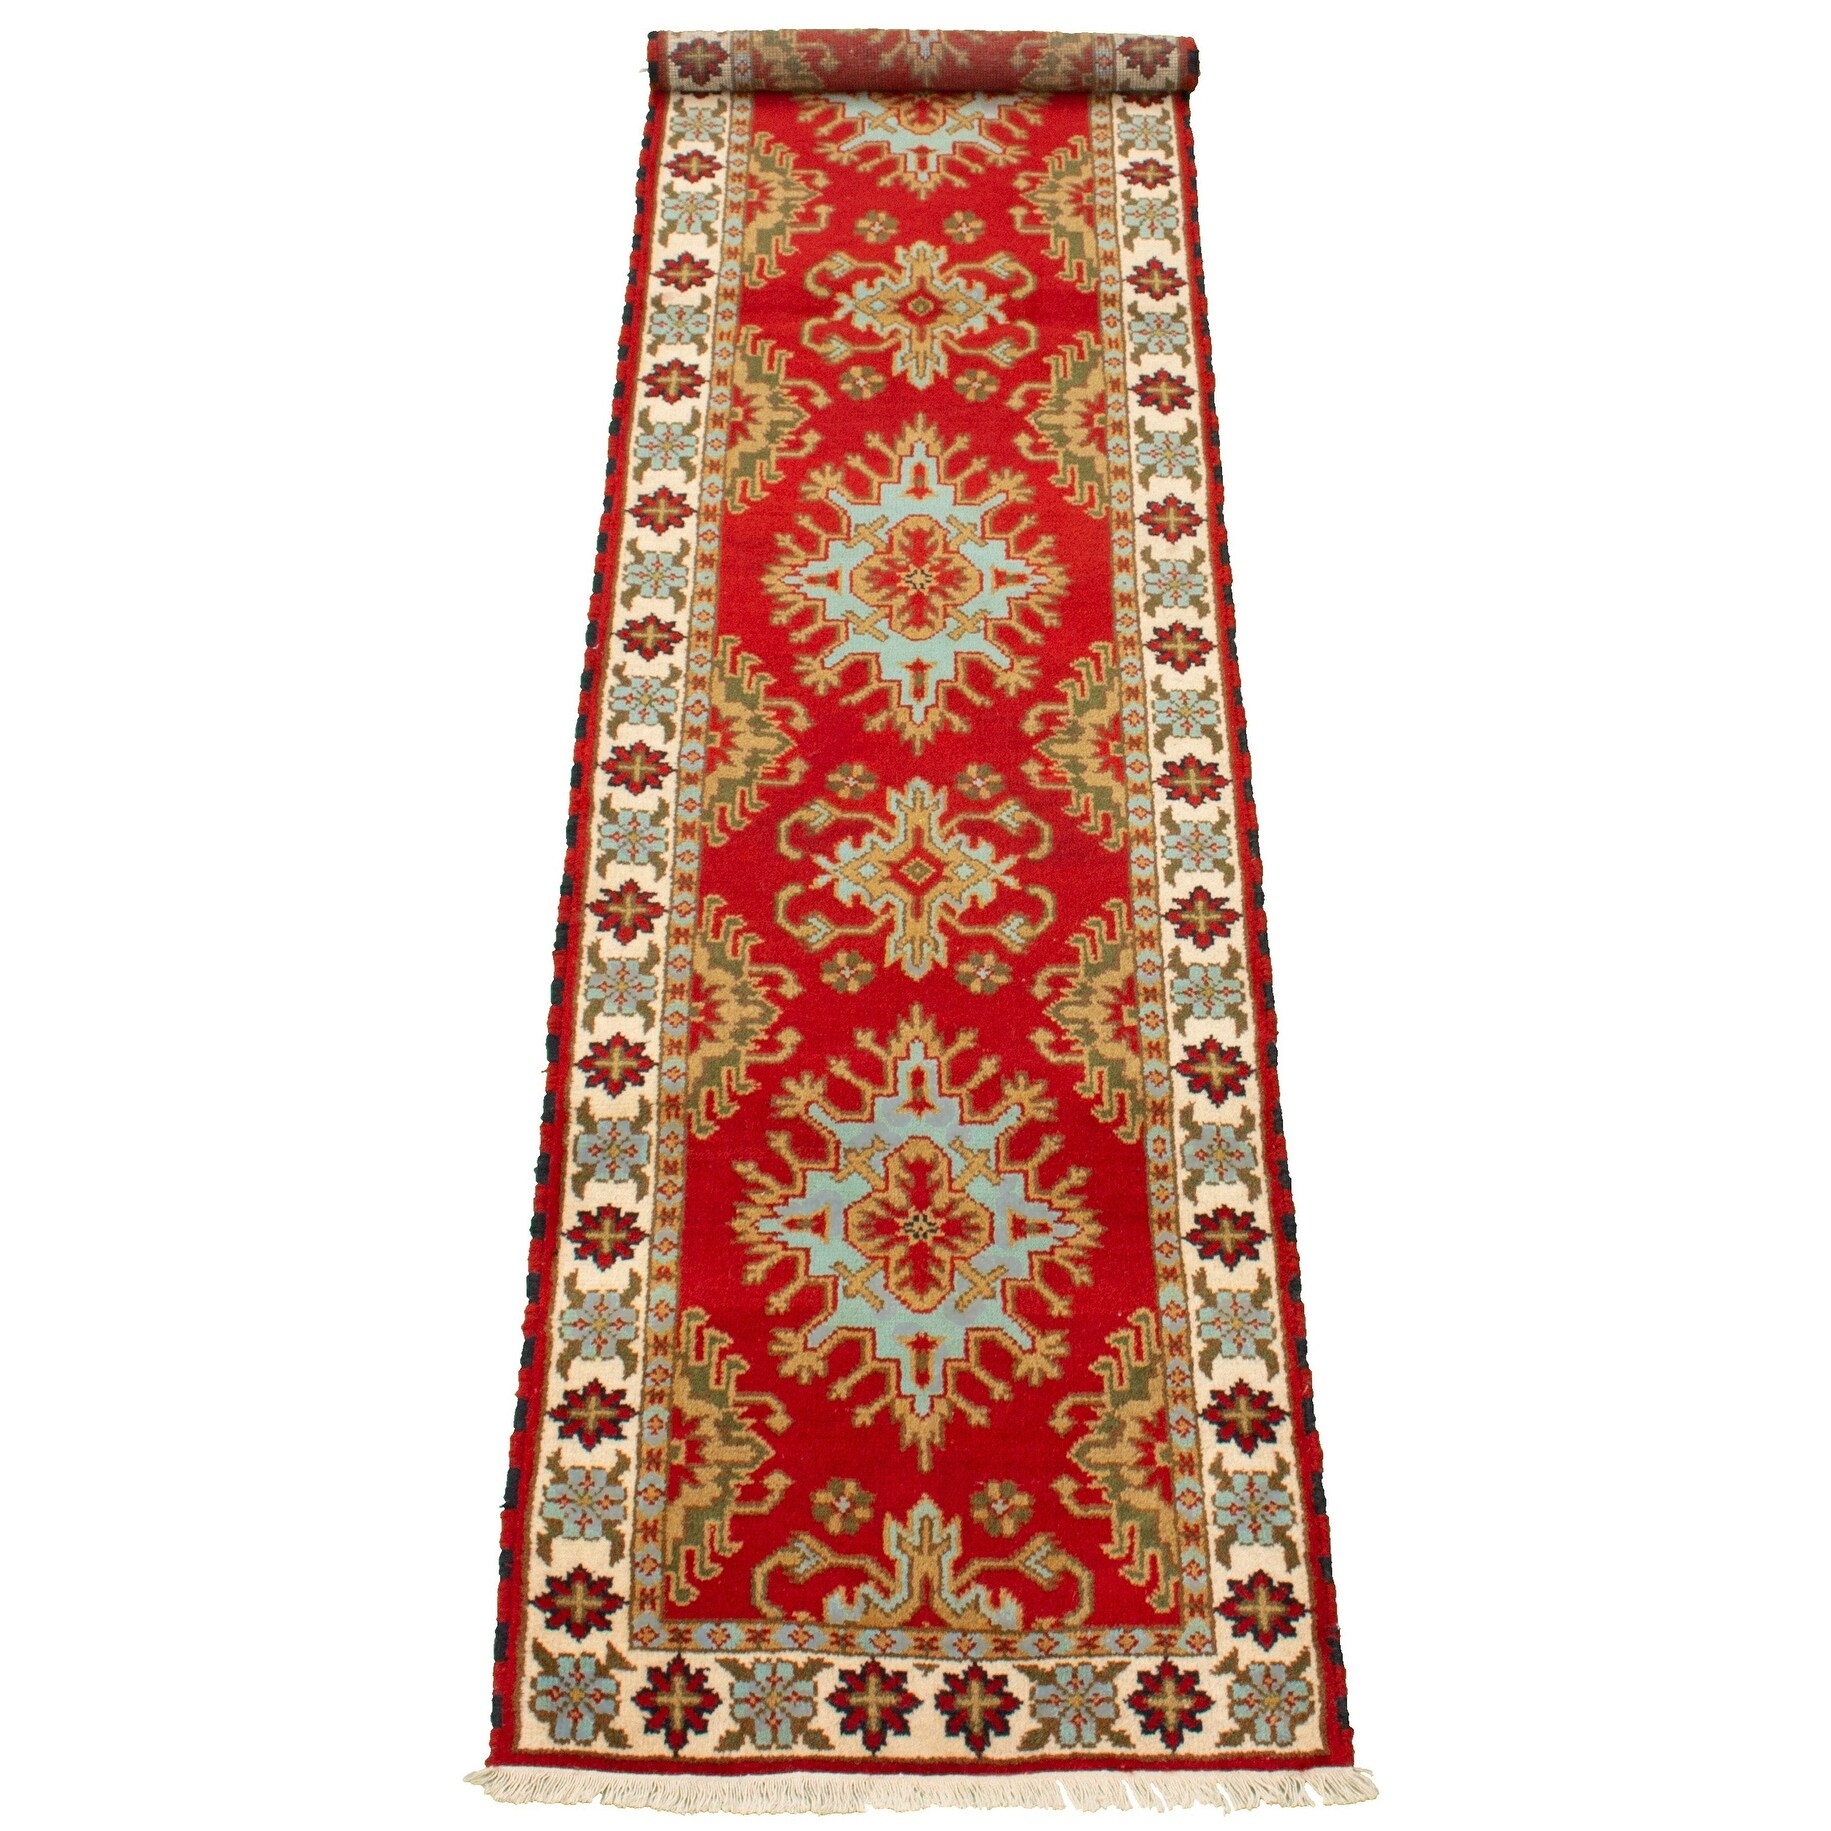 eCarpet Gallery Large Area Rug for Living Room 303090 Chobi Finest Bordered Red Rug 10'0 x 13'10 Hand-Knotted Wool Rug Bedroom 